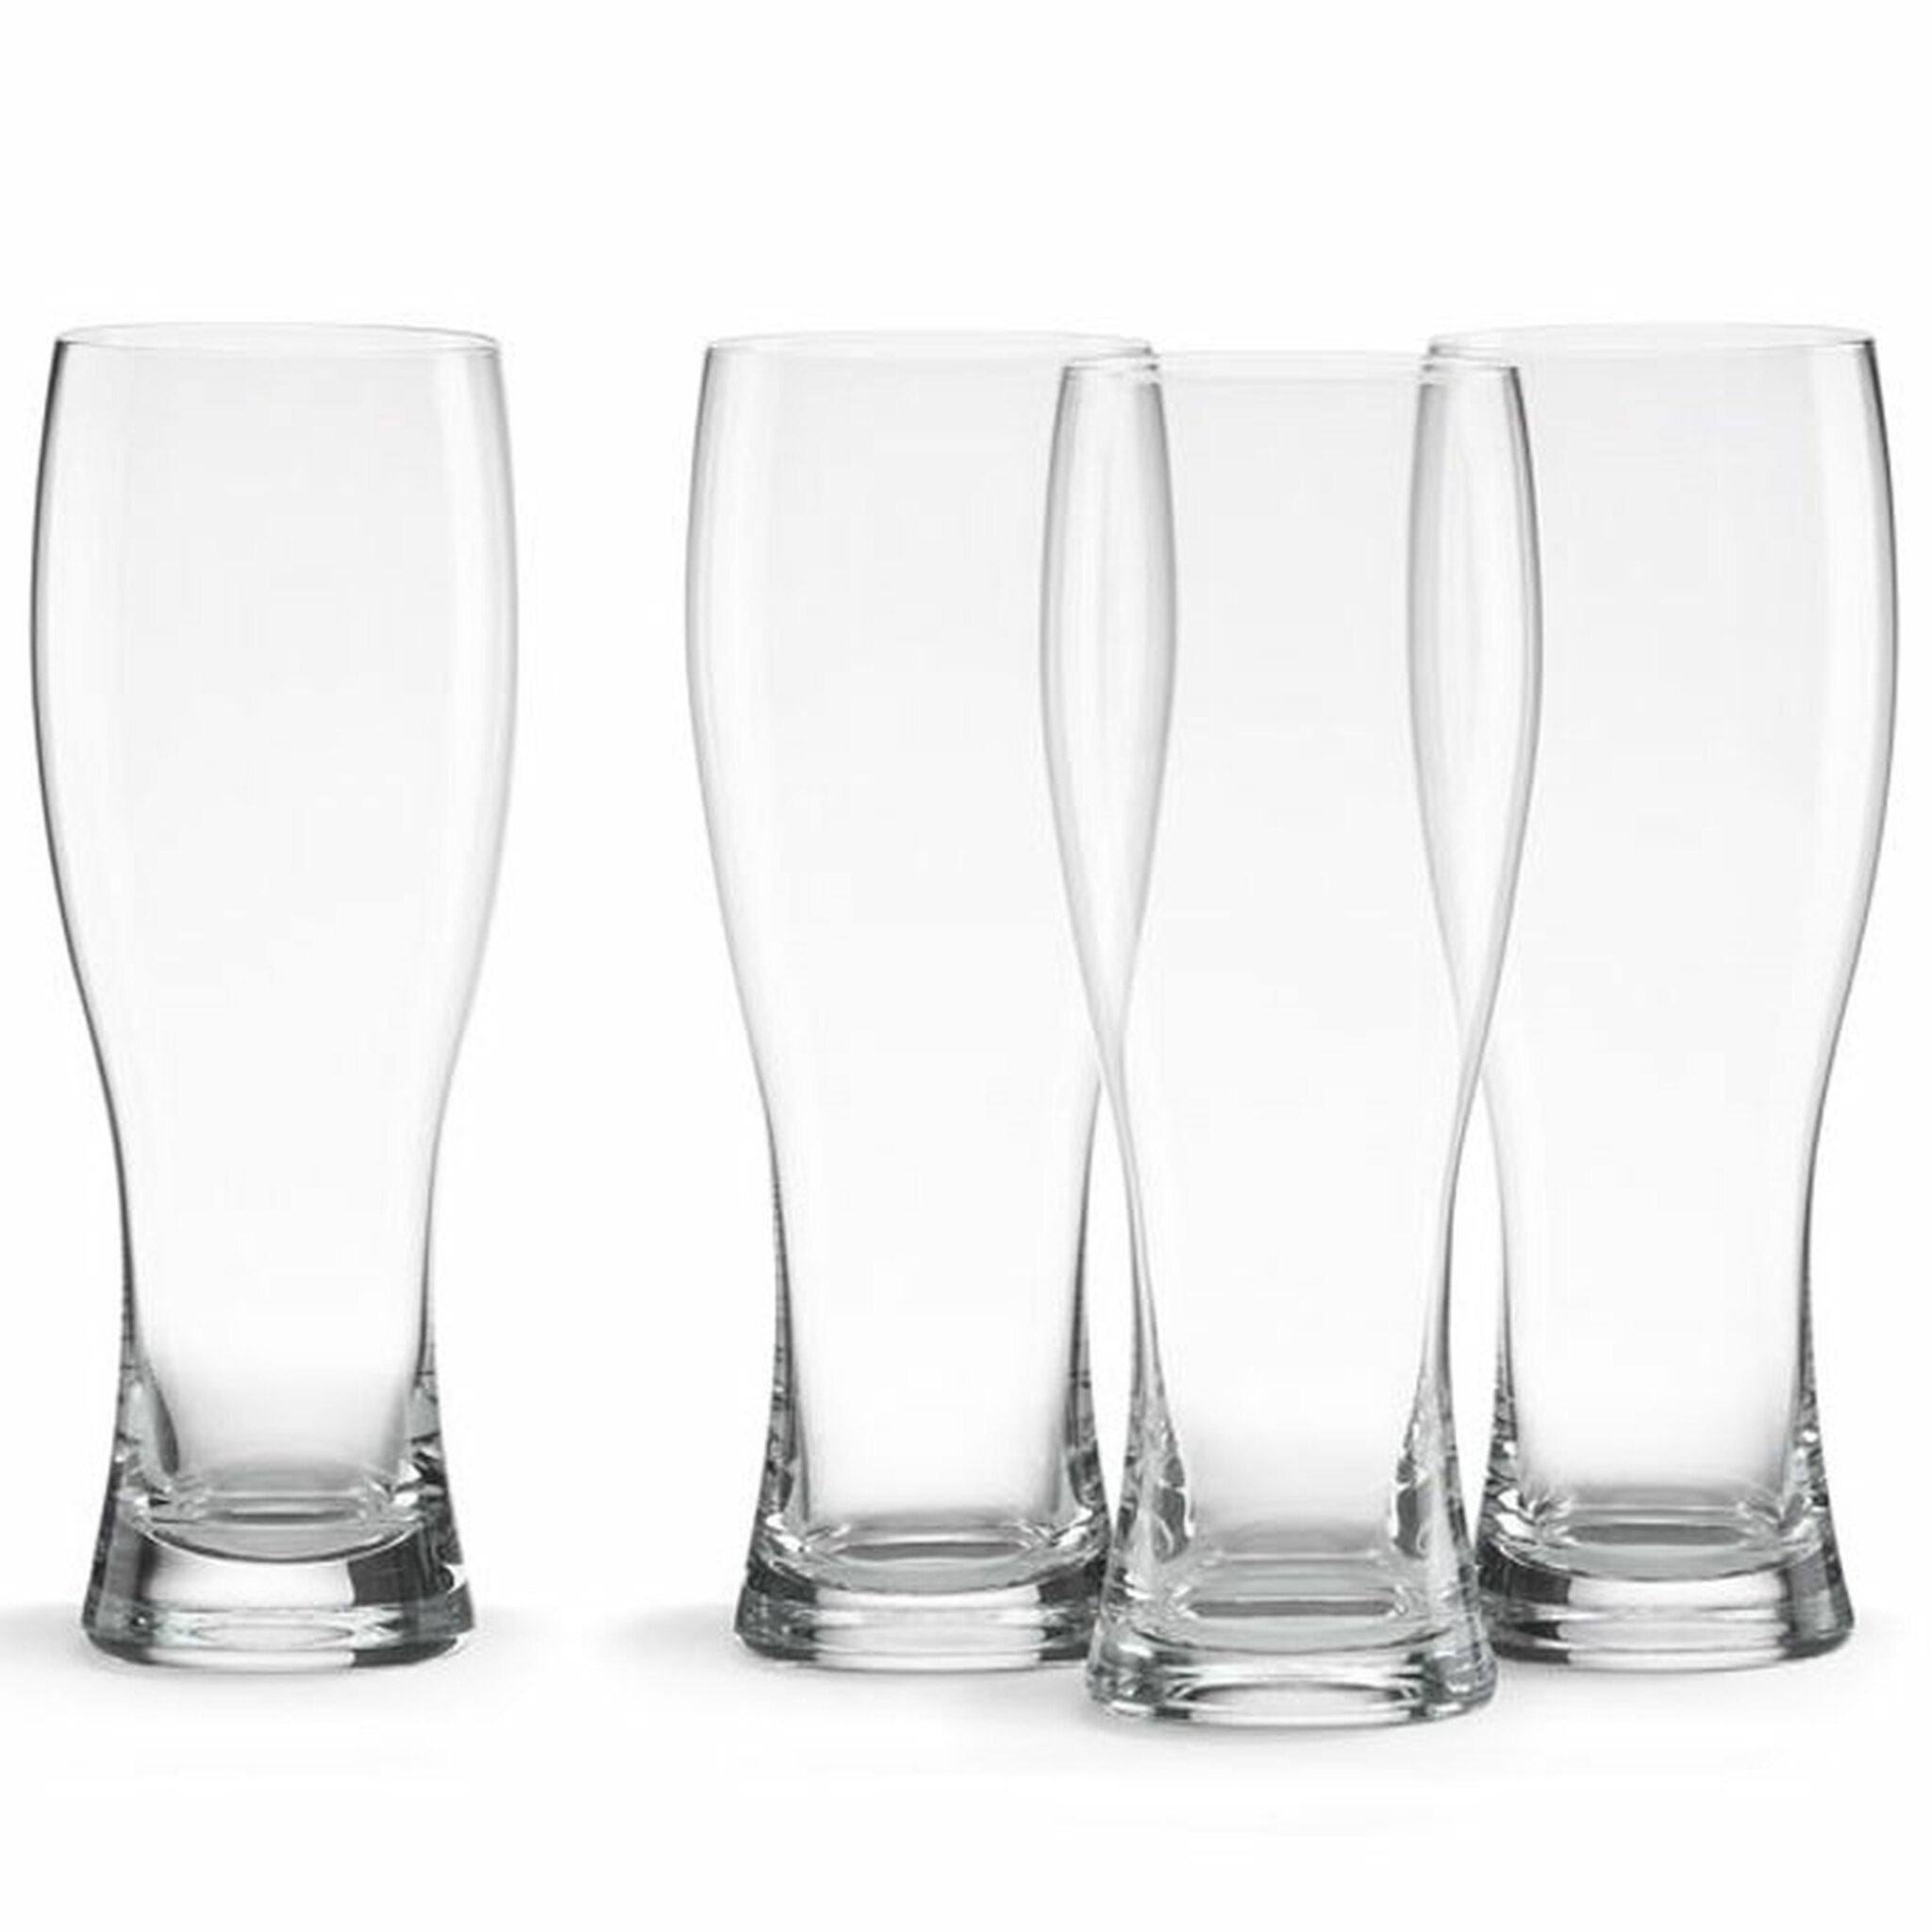 Wheat Beer Glasses-set of 4